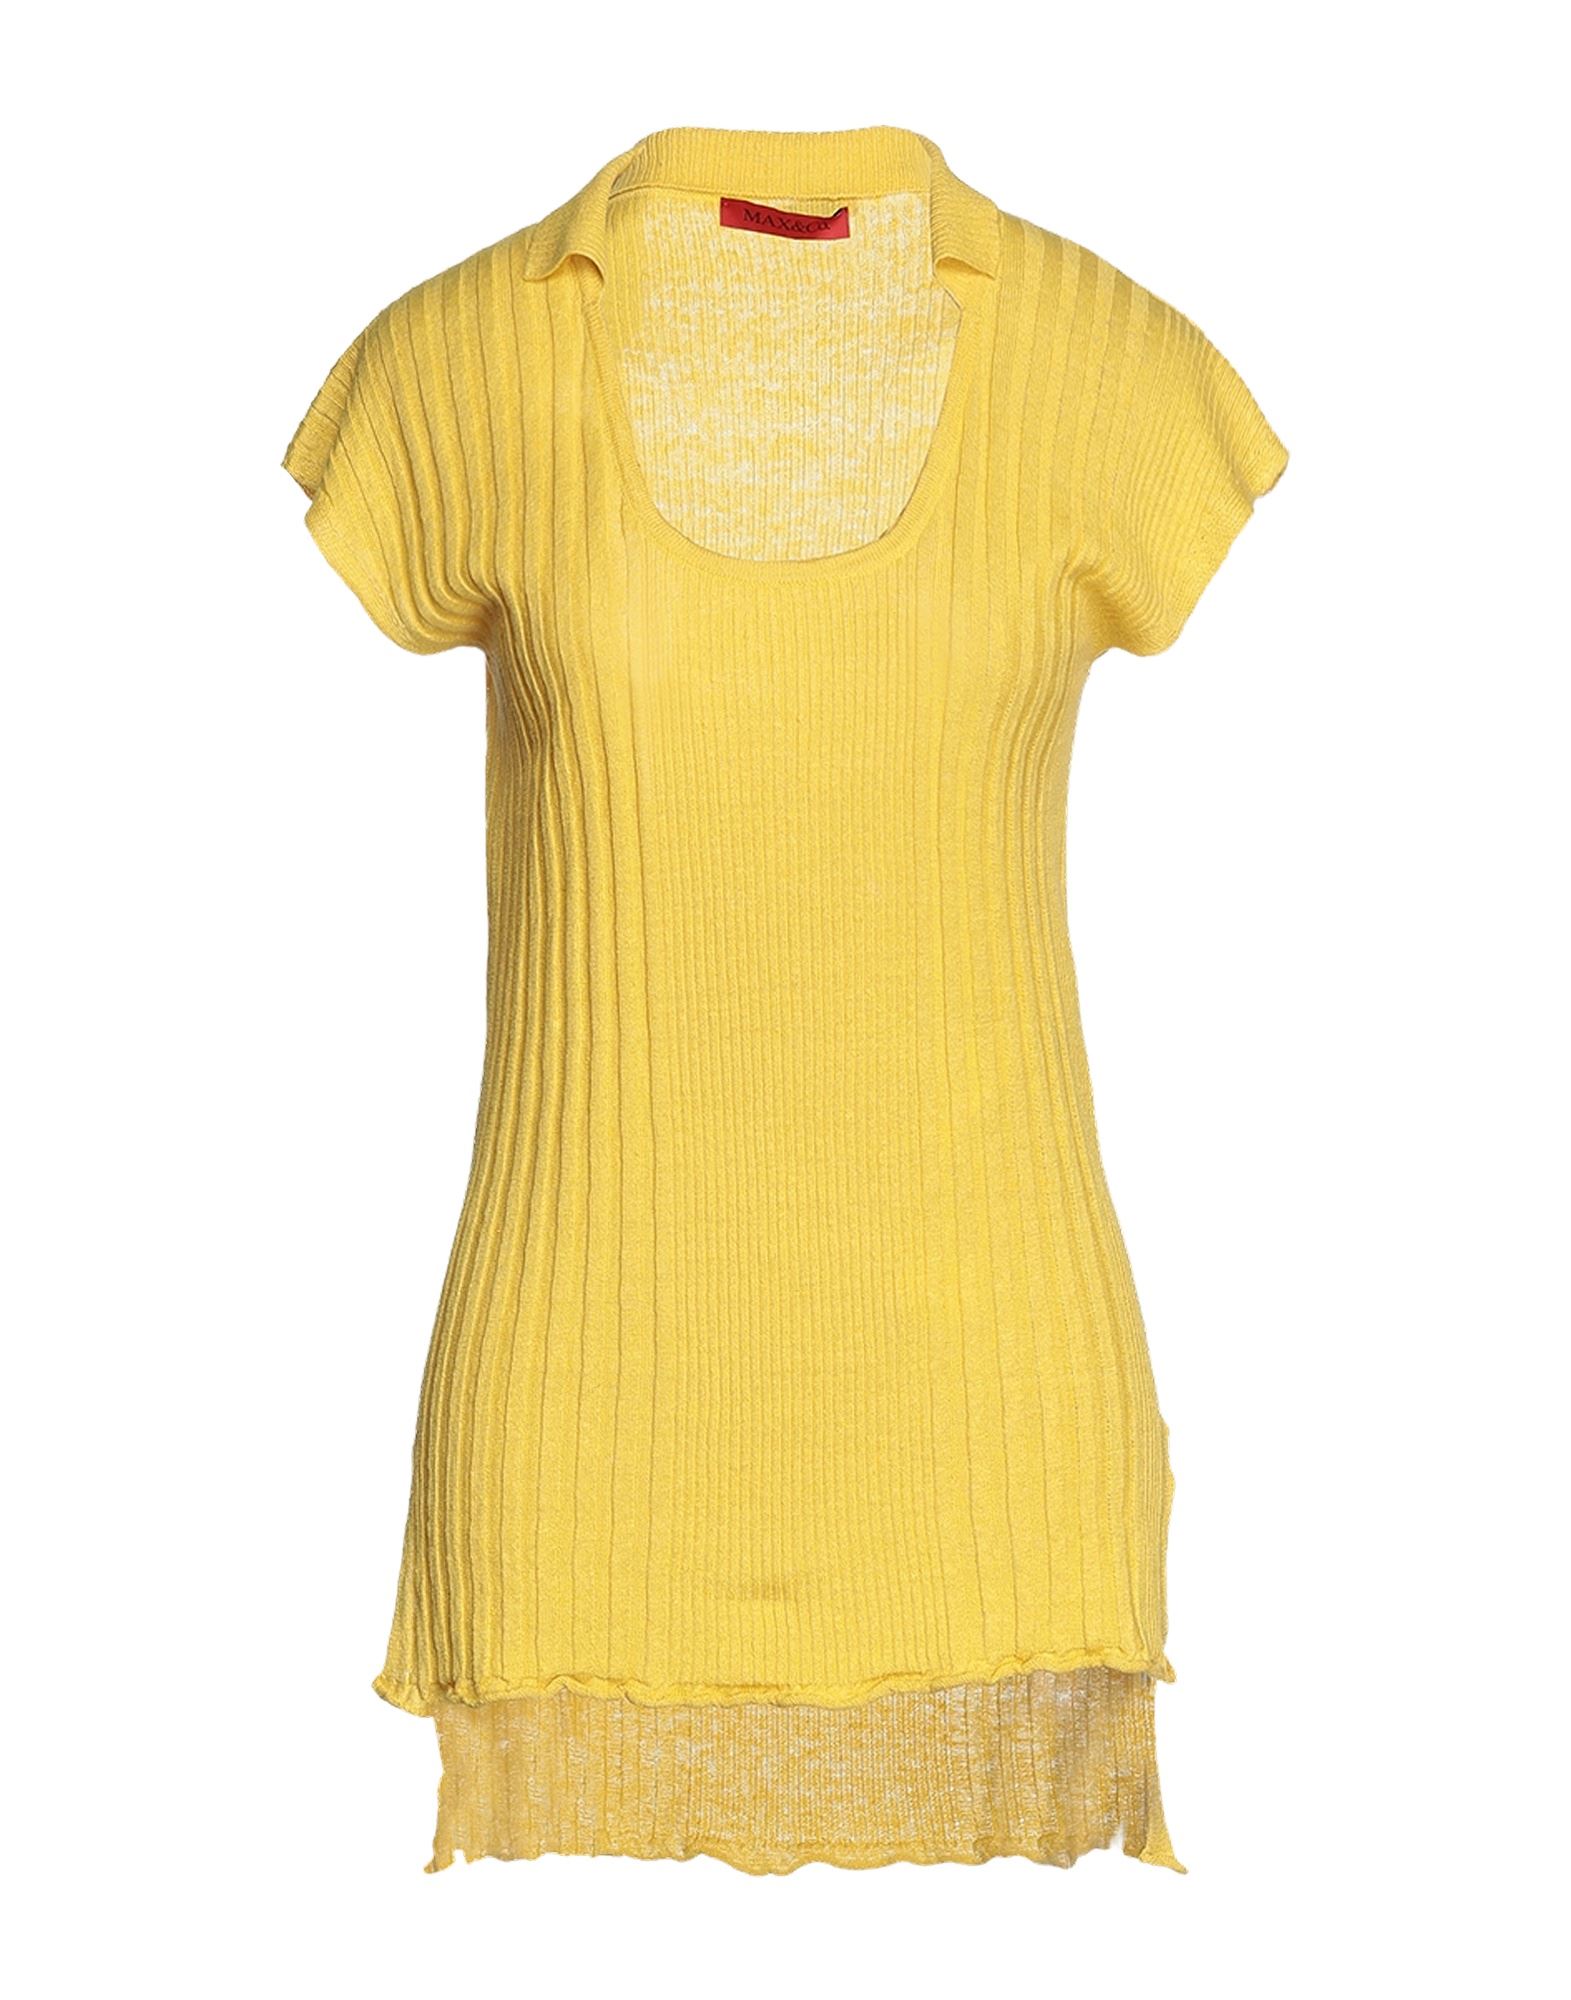 Shop Max & Co . Woman Sweater Yellow Size L Linen